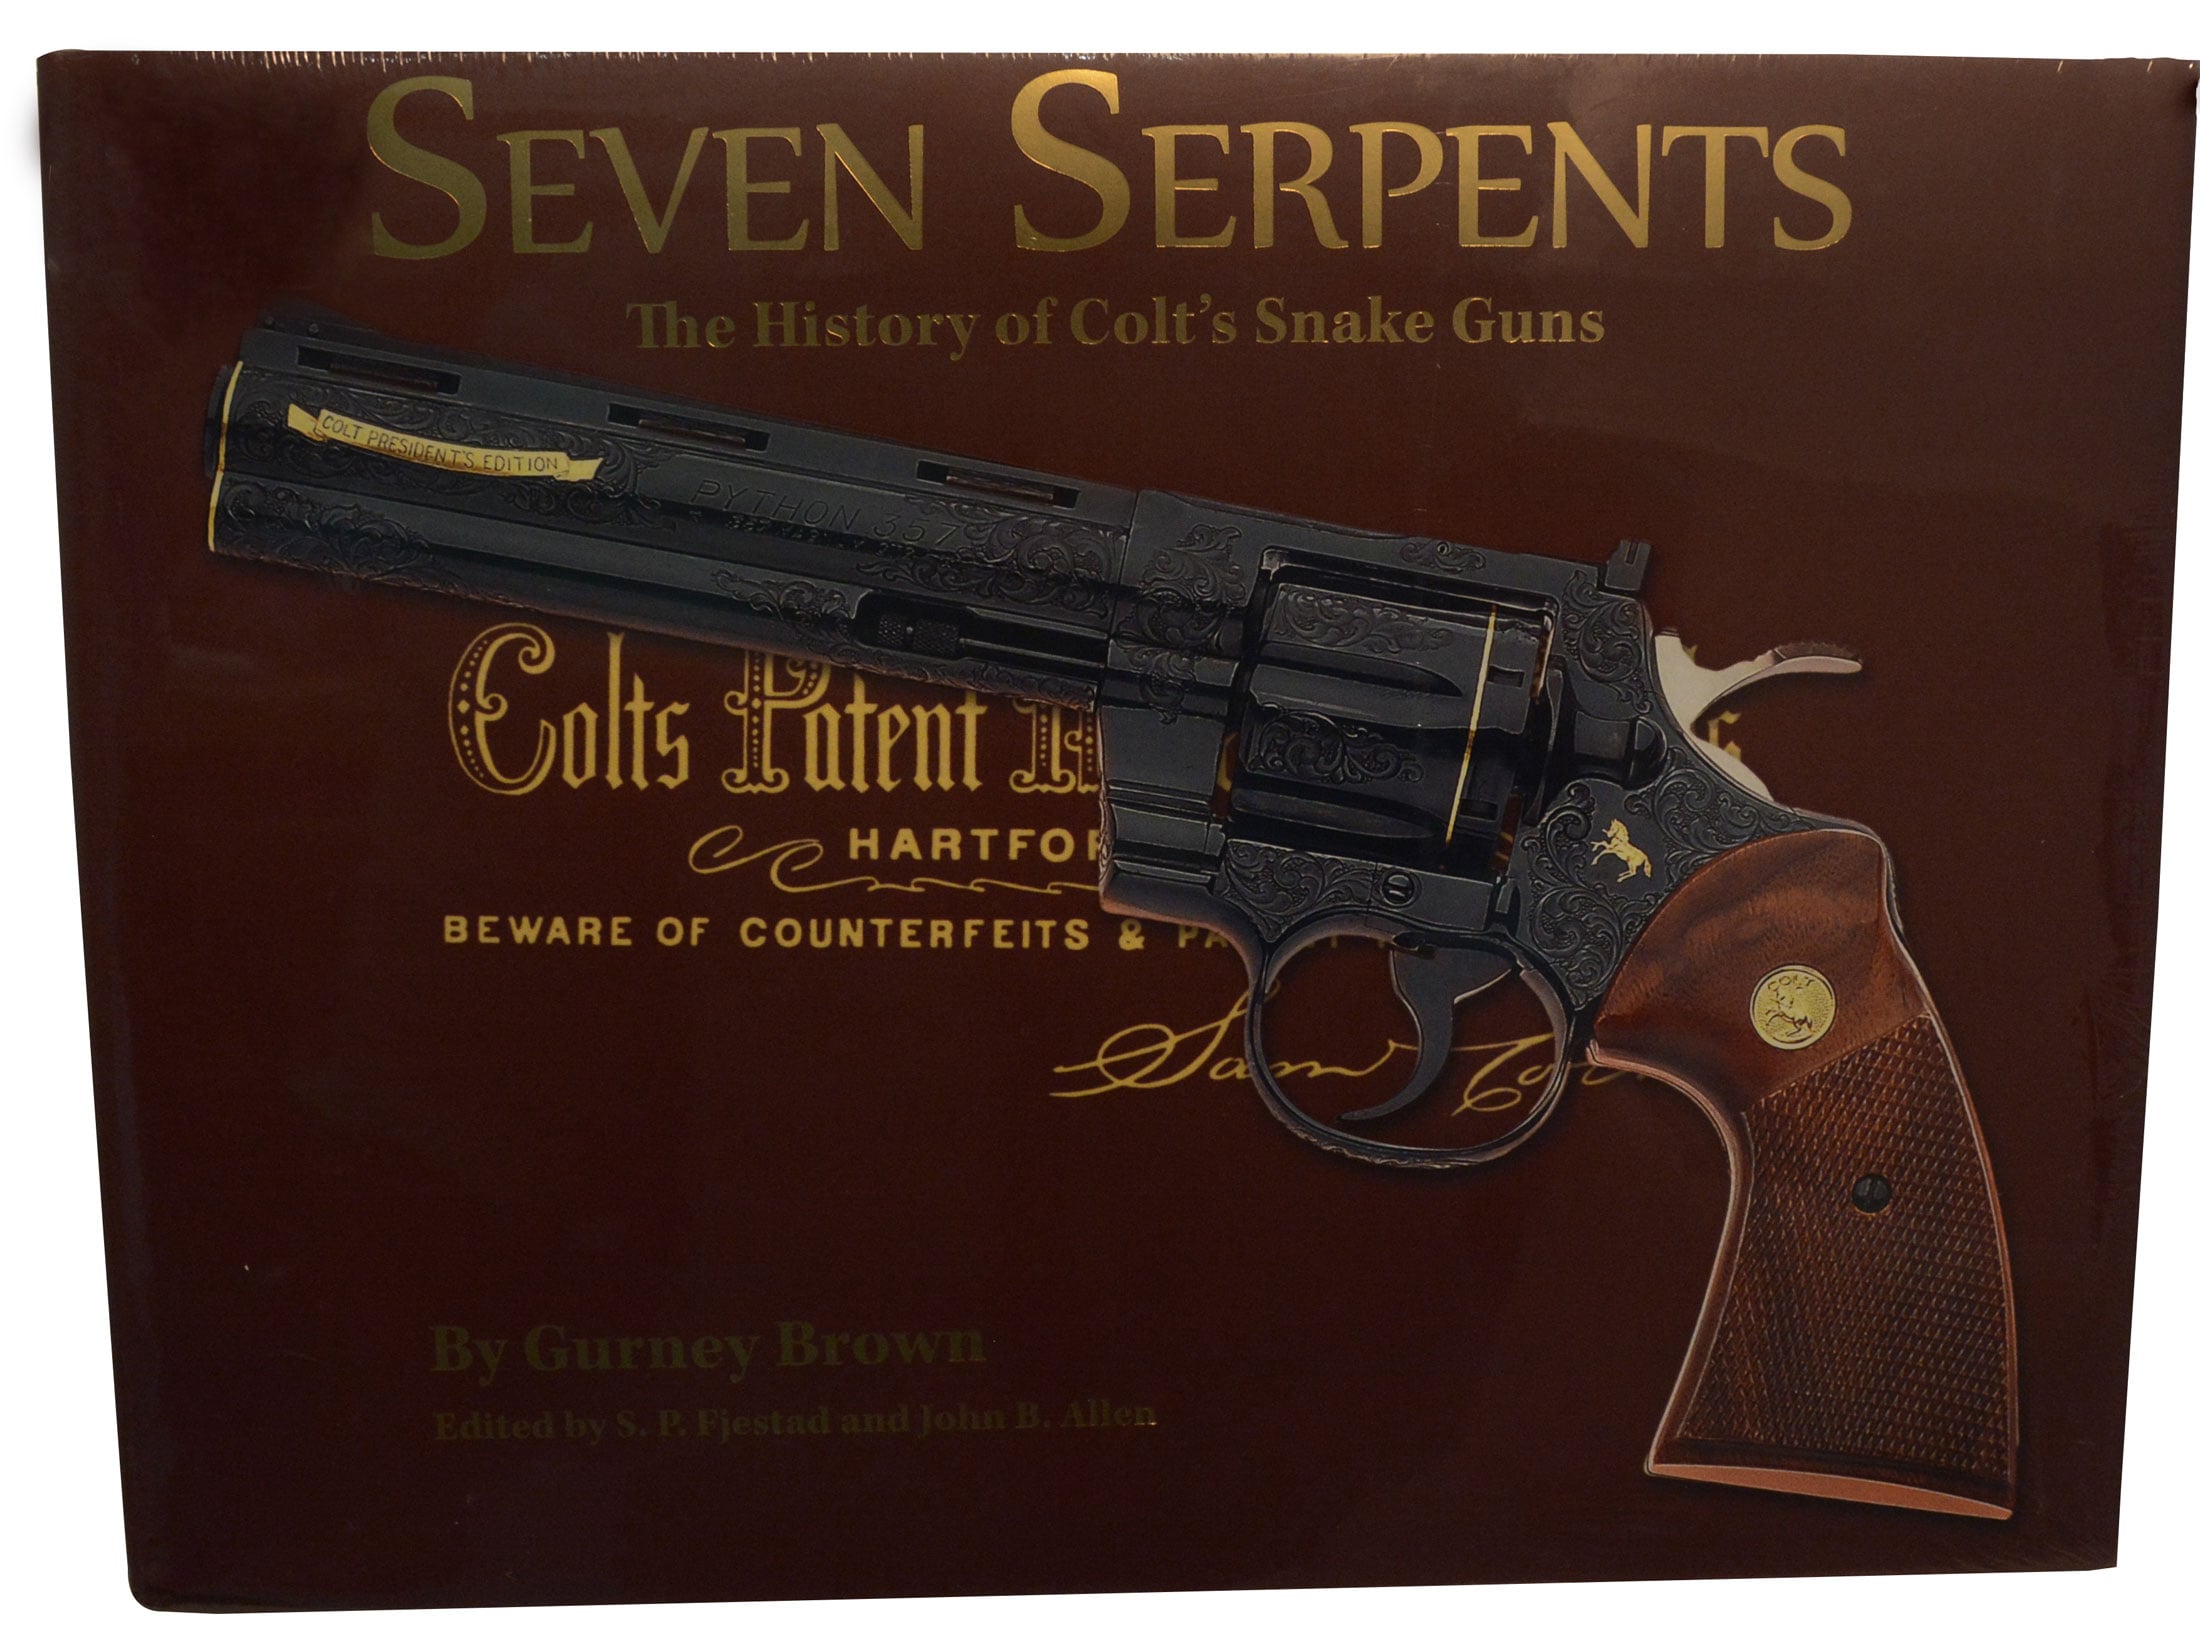 Seven Serpents - The History of Colt's Snake Guns by Gurney Brown